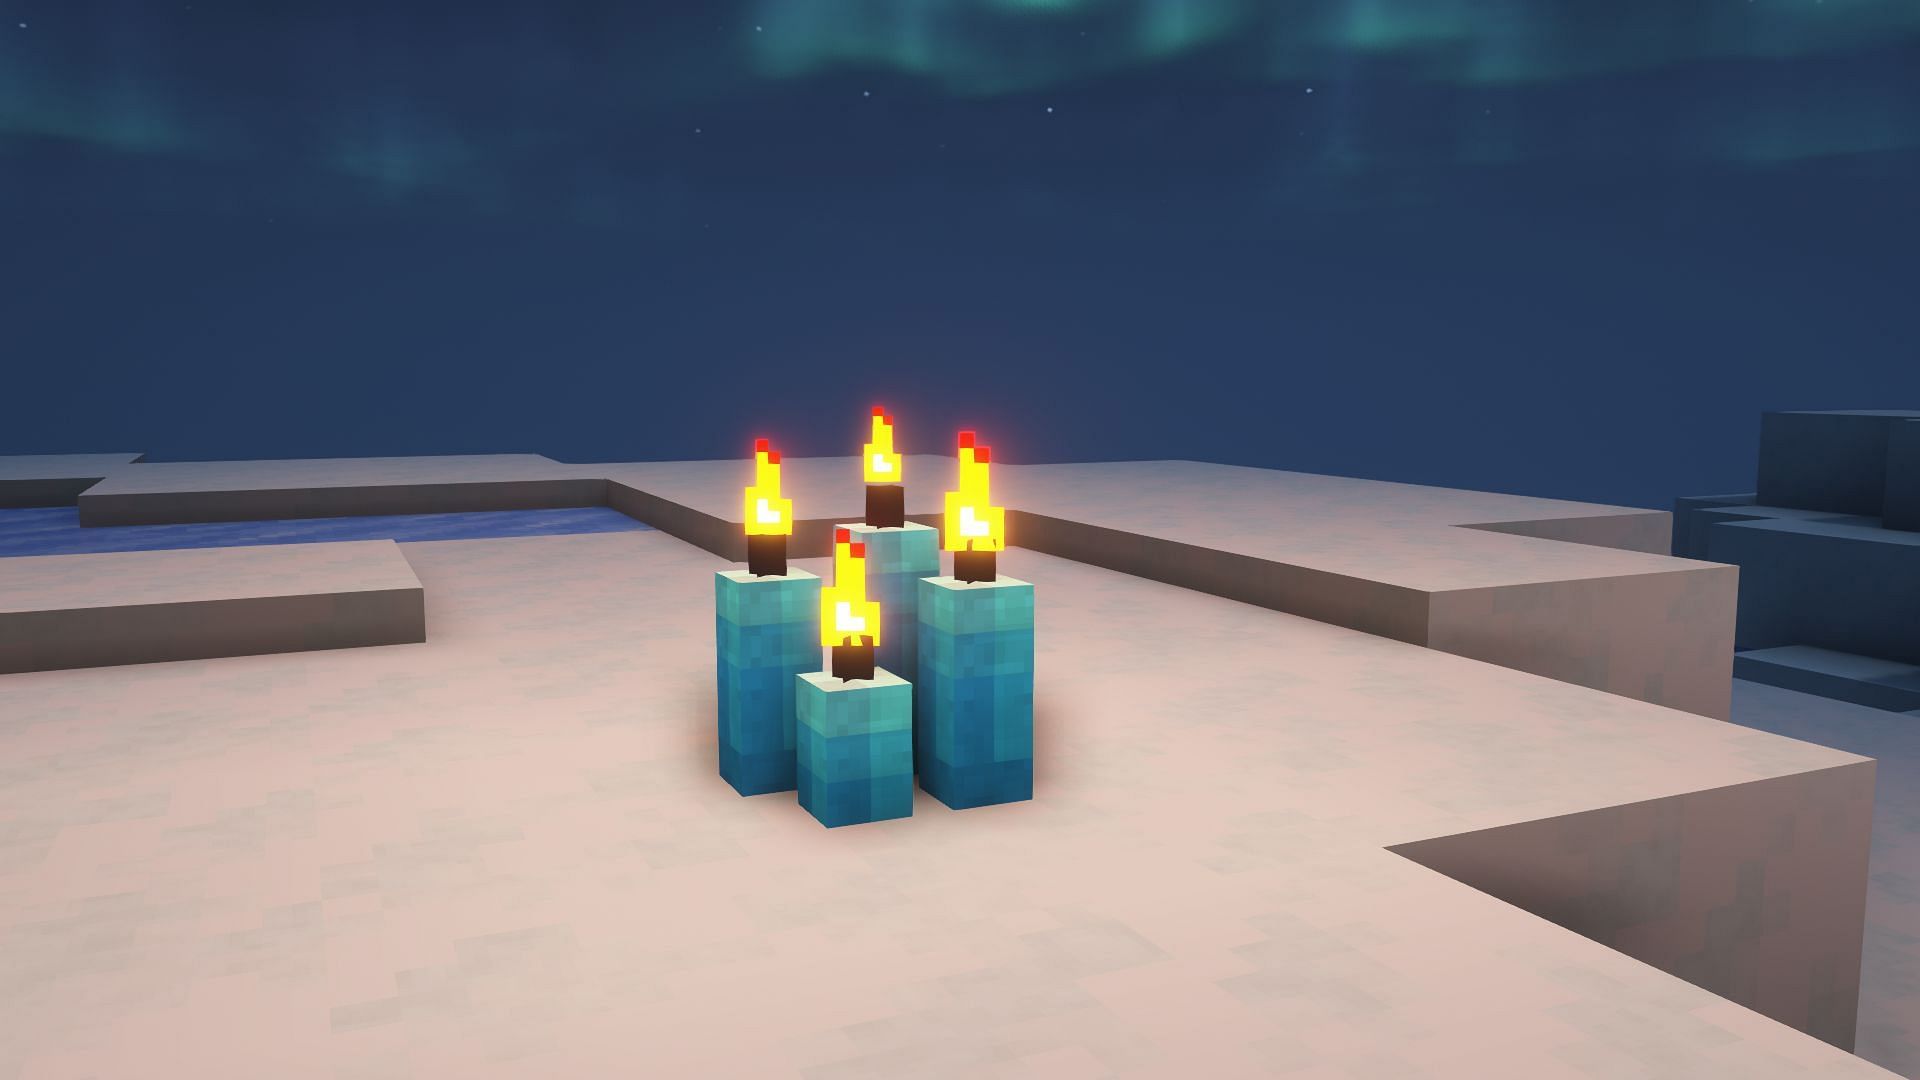 Candles produce less light but are great for creating a mellow and cozy ambiance in Minecraft (Image via Mojang)